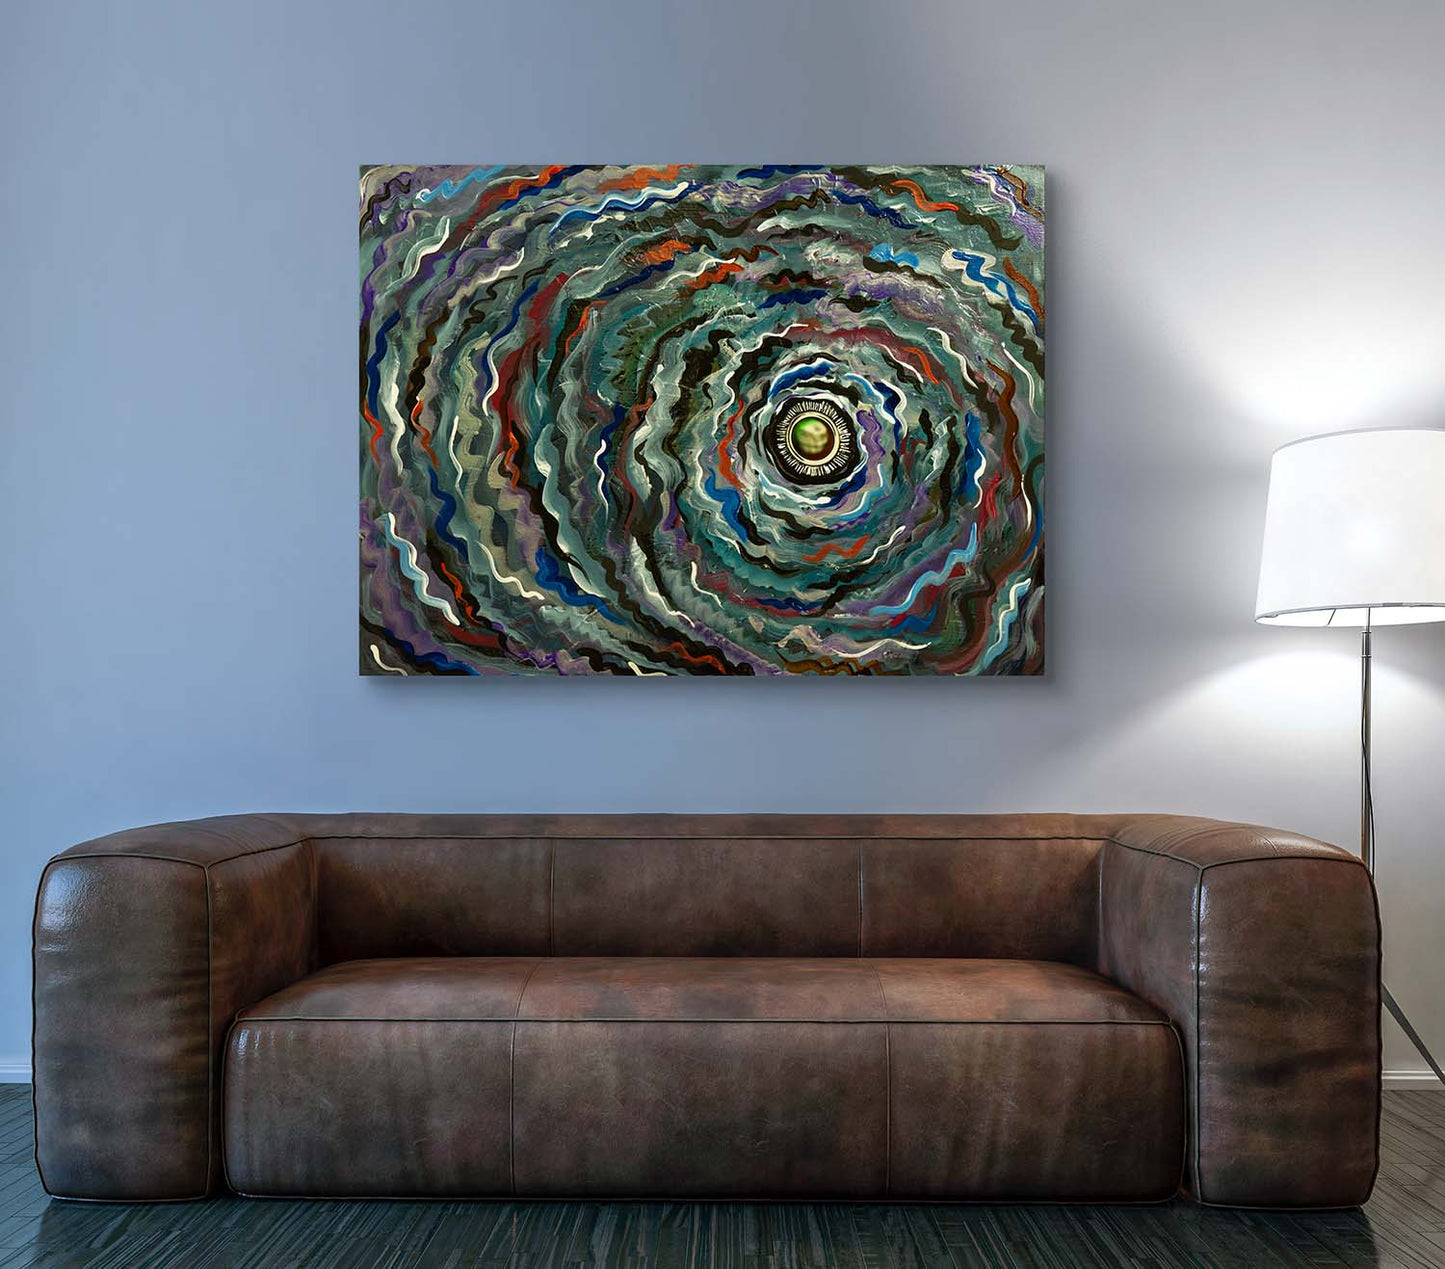 Metallic Vortex canvas print on wall over a brown couch